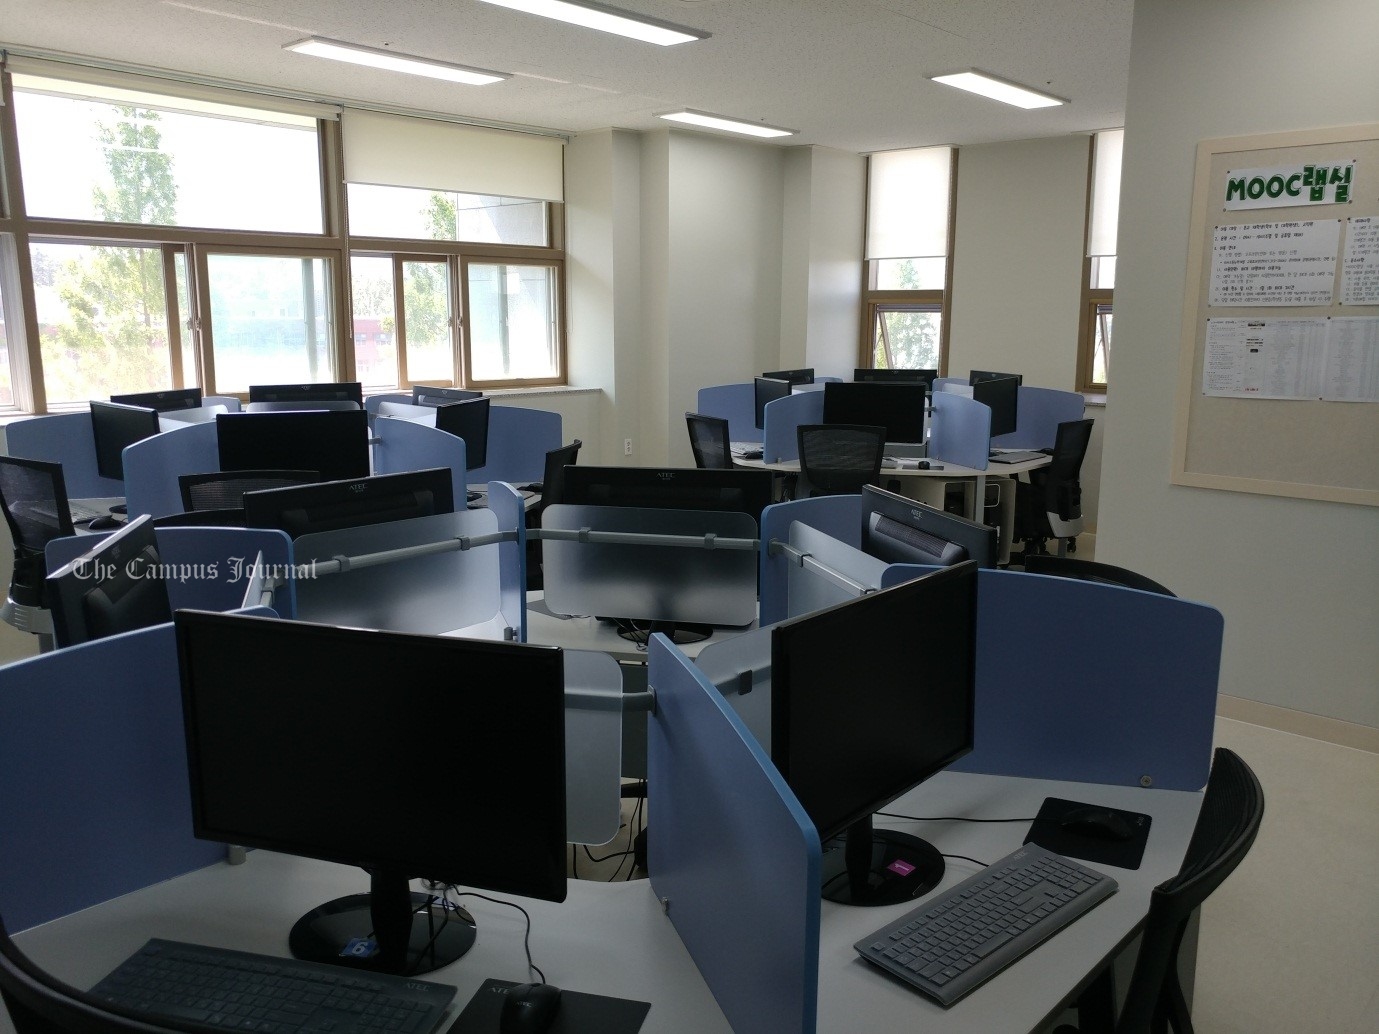 The MOOC room, just one of several neglected facilities